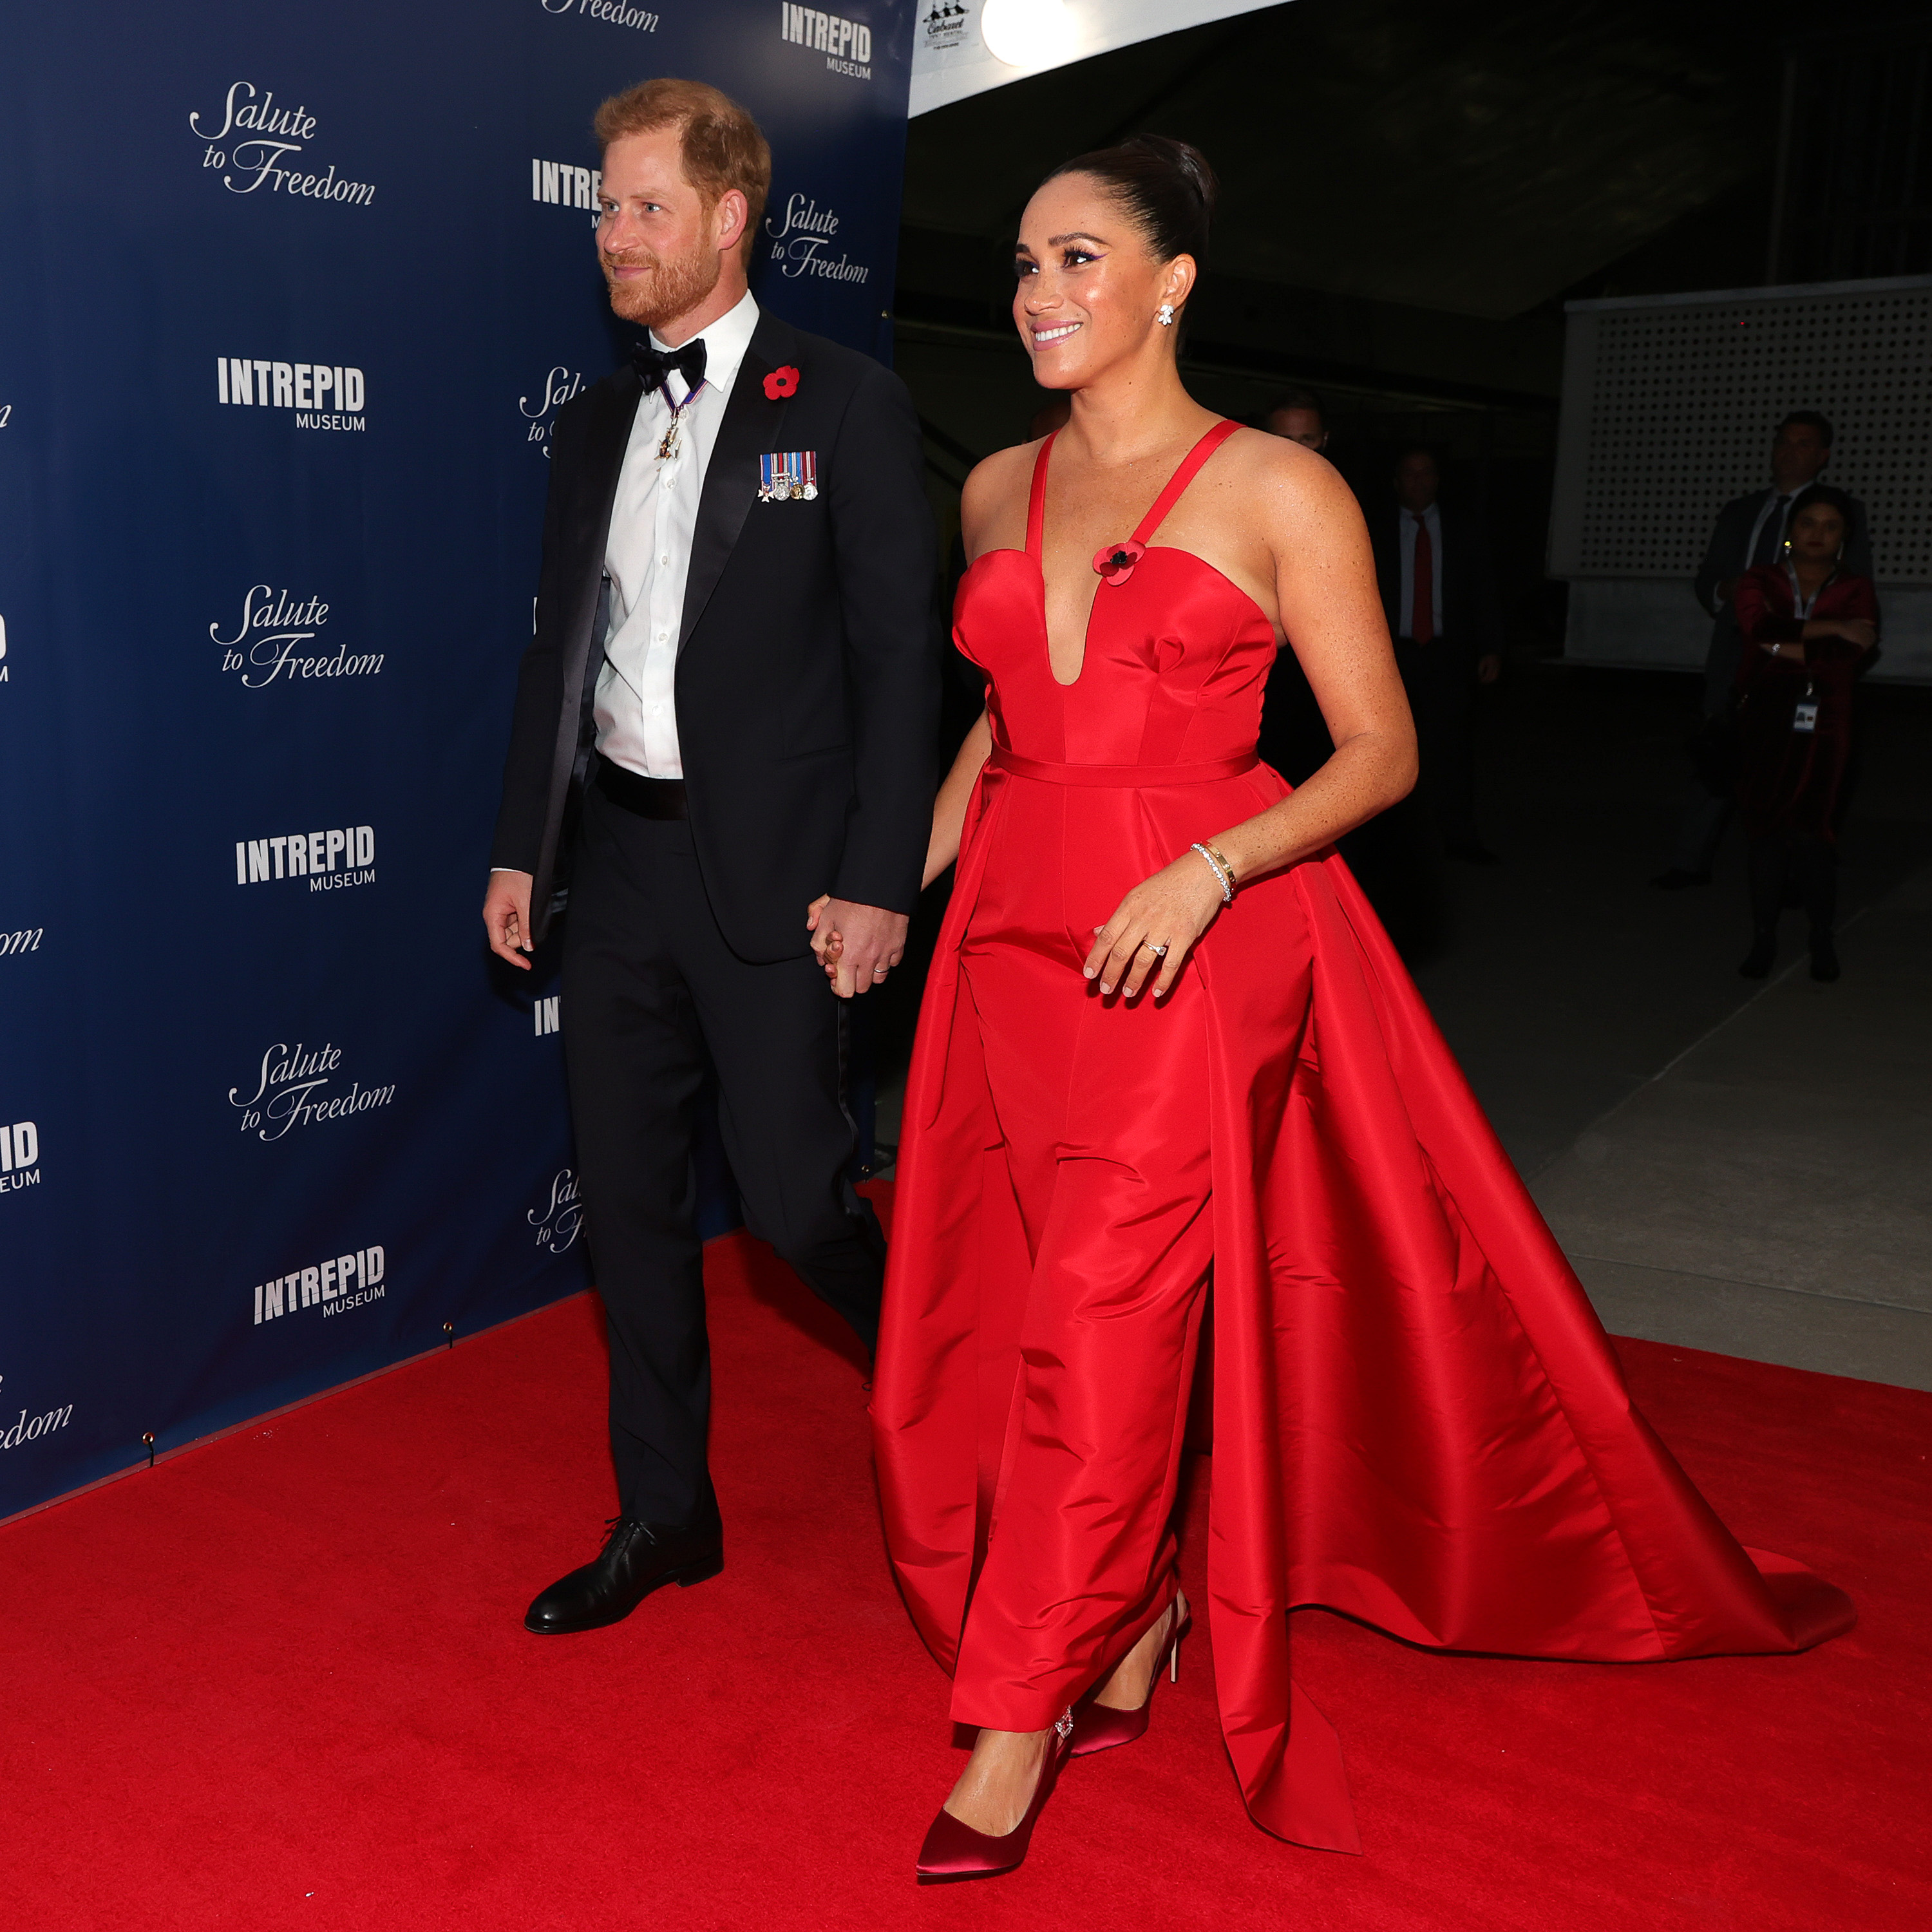 Prince Harry and Meghan Markle at the Salute To Freedom Gala in New York City on November 10, 2021 | Source: Getty Images